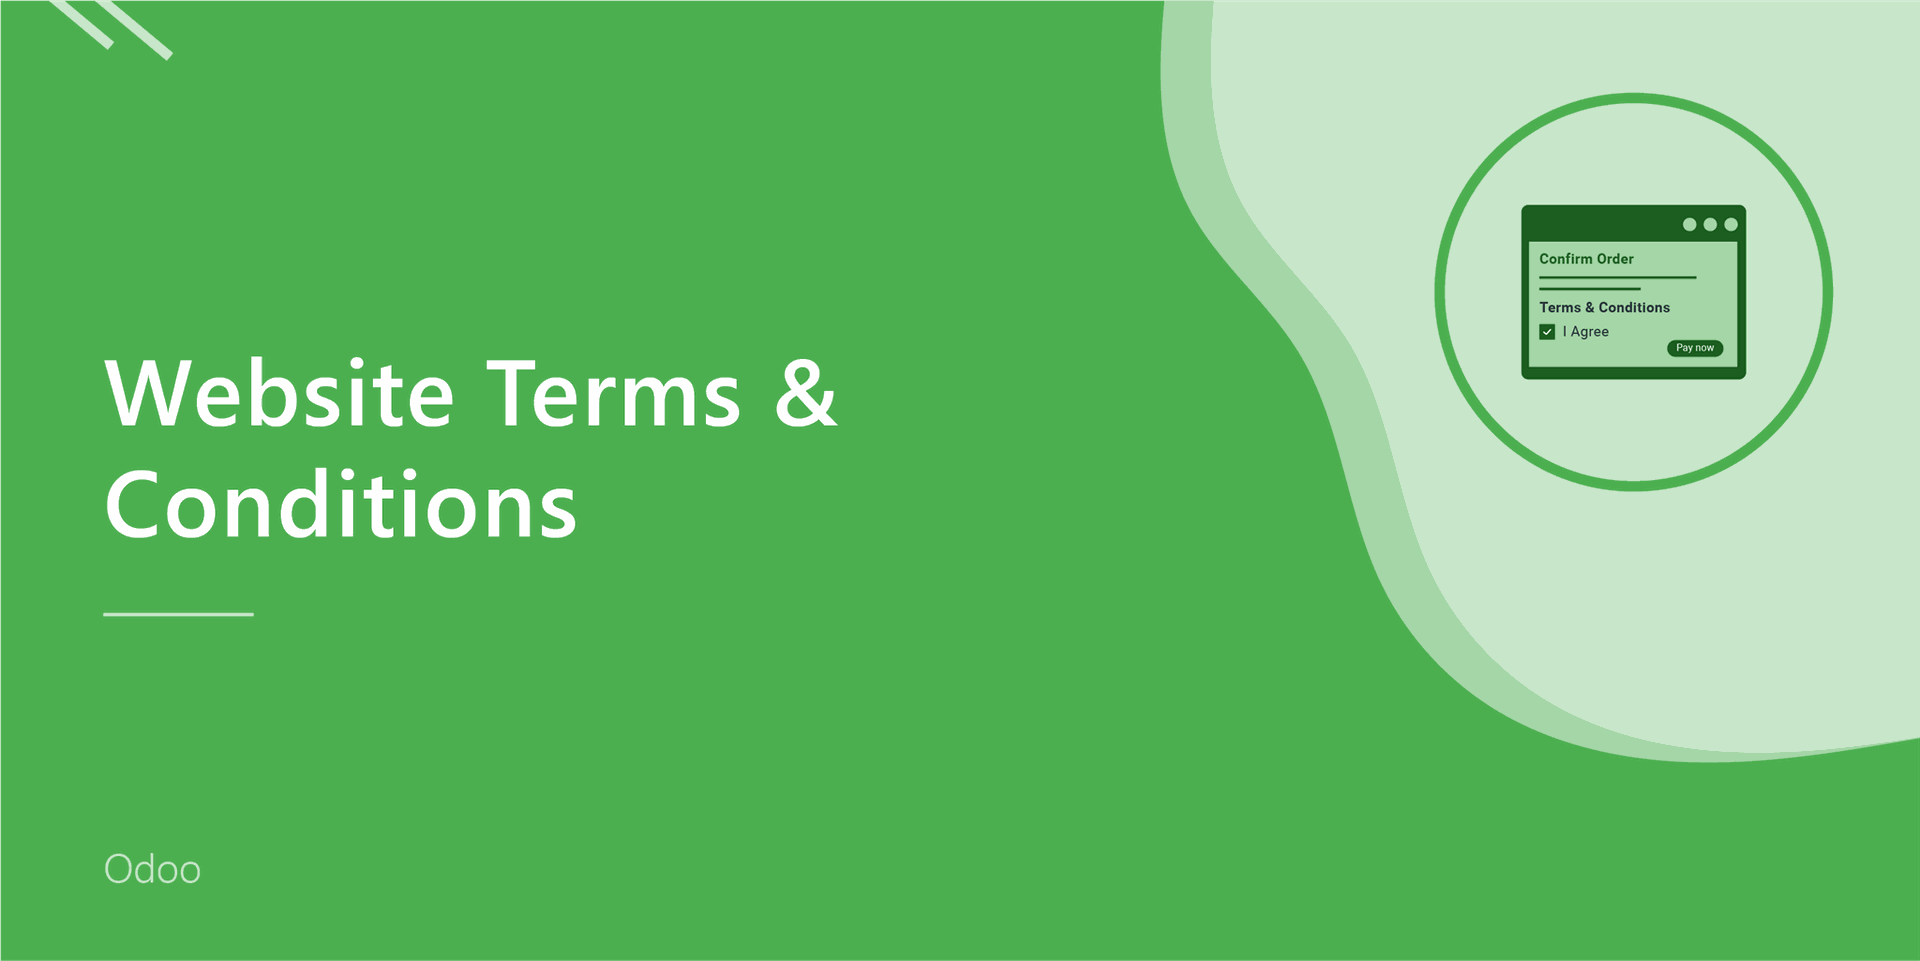 Website Terms & Conditions
